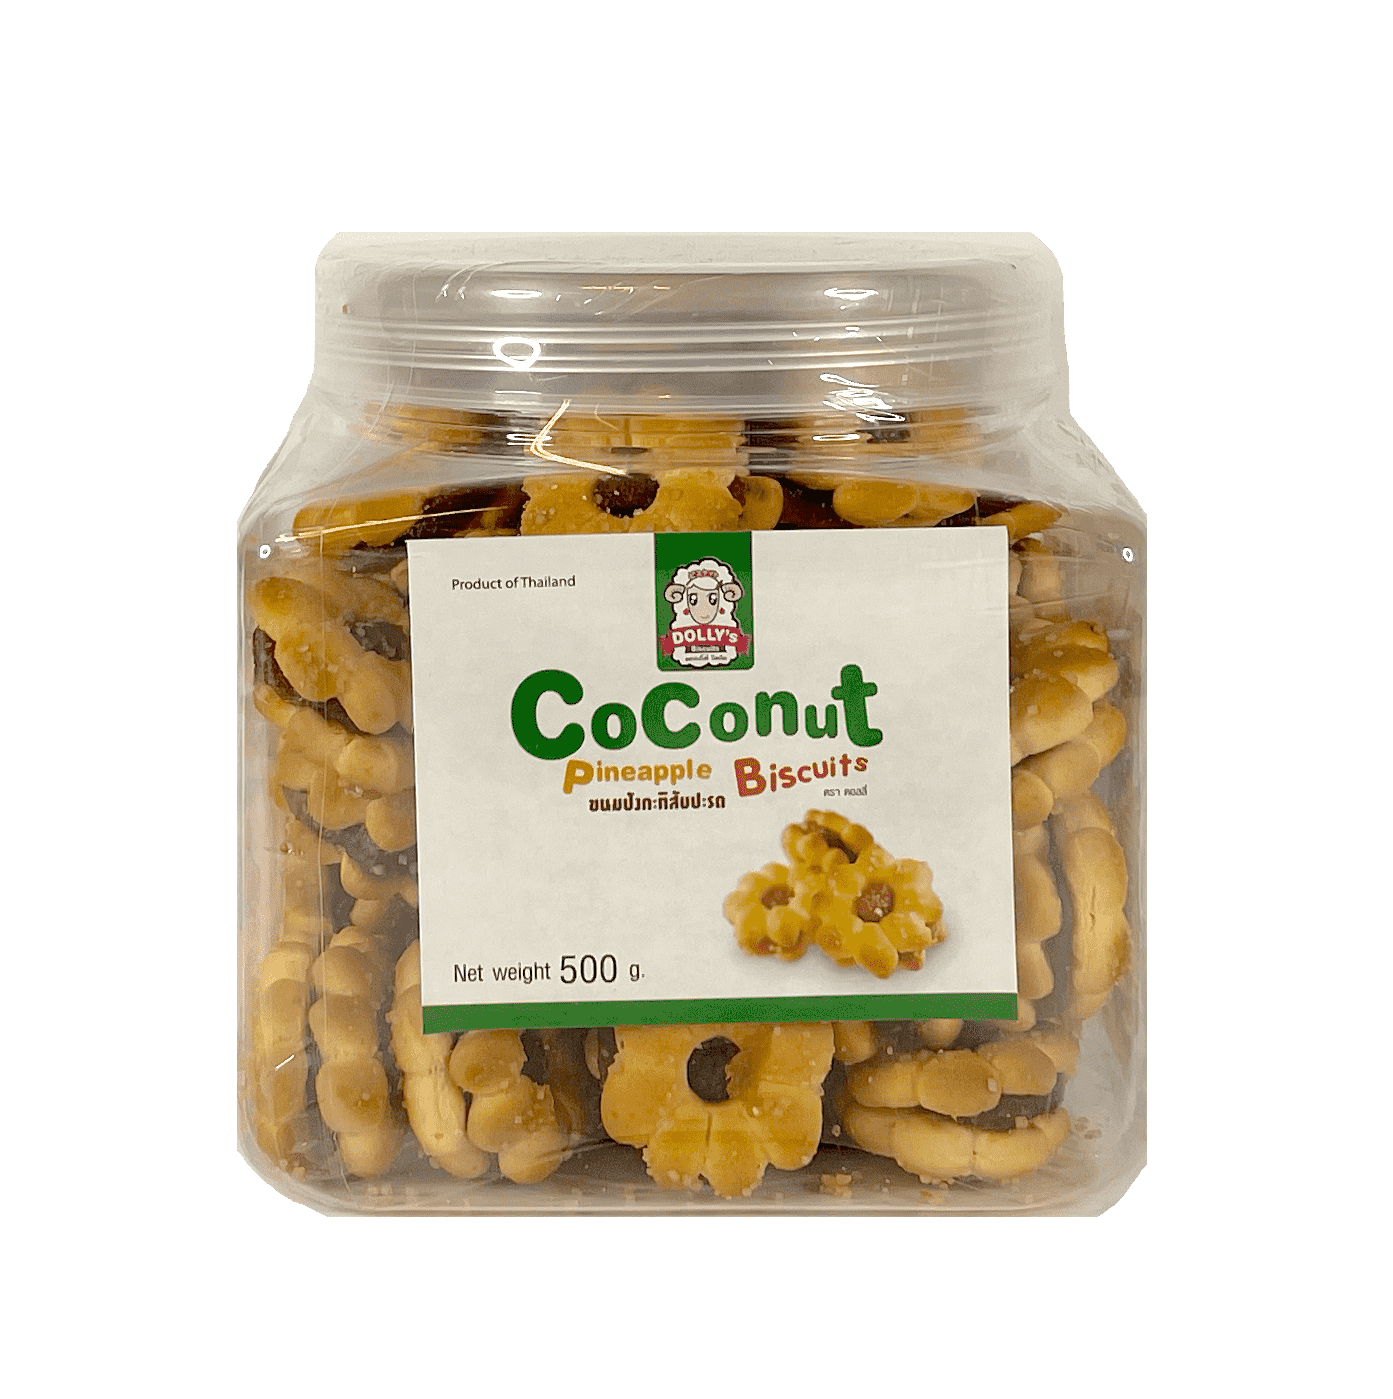 Coconut Pineapple Biscuit 500g Dollys Thailand